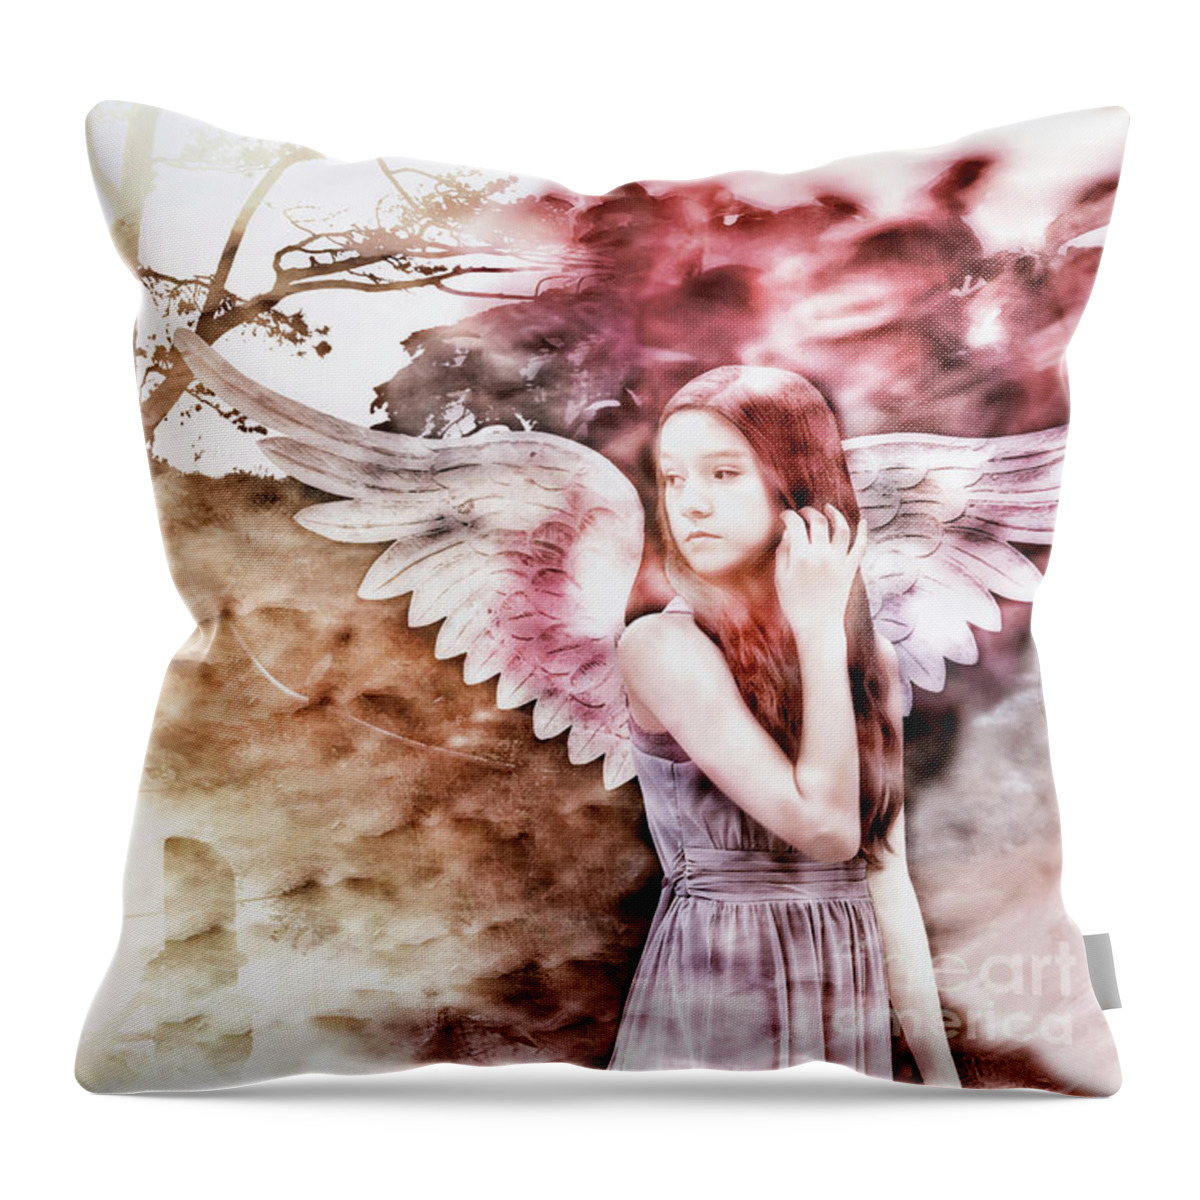 Angel Throw Pillow featuring the digital art God's Creation by Claudia Ellis